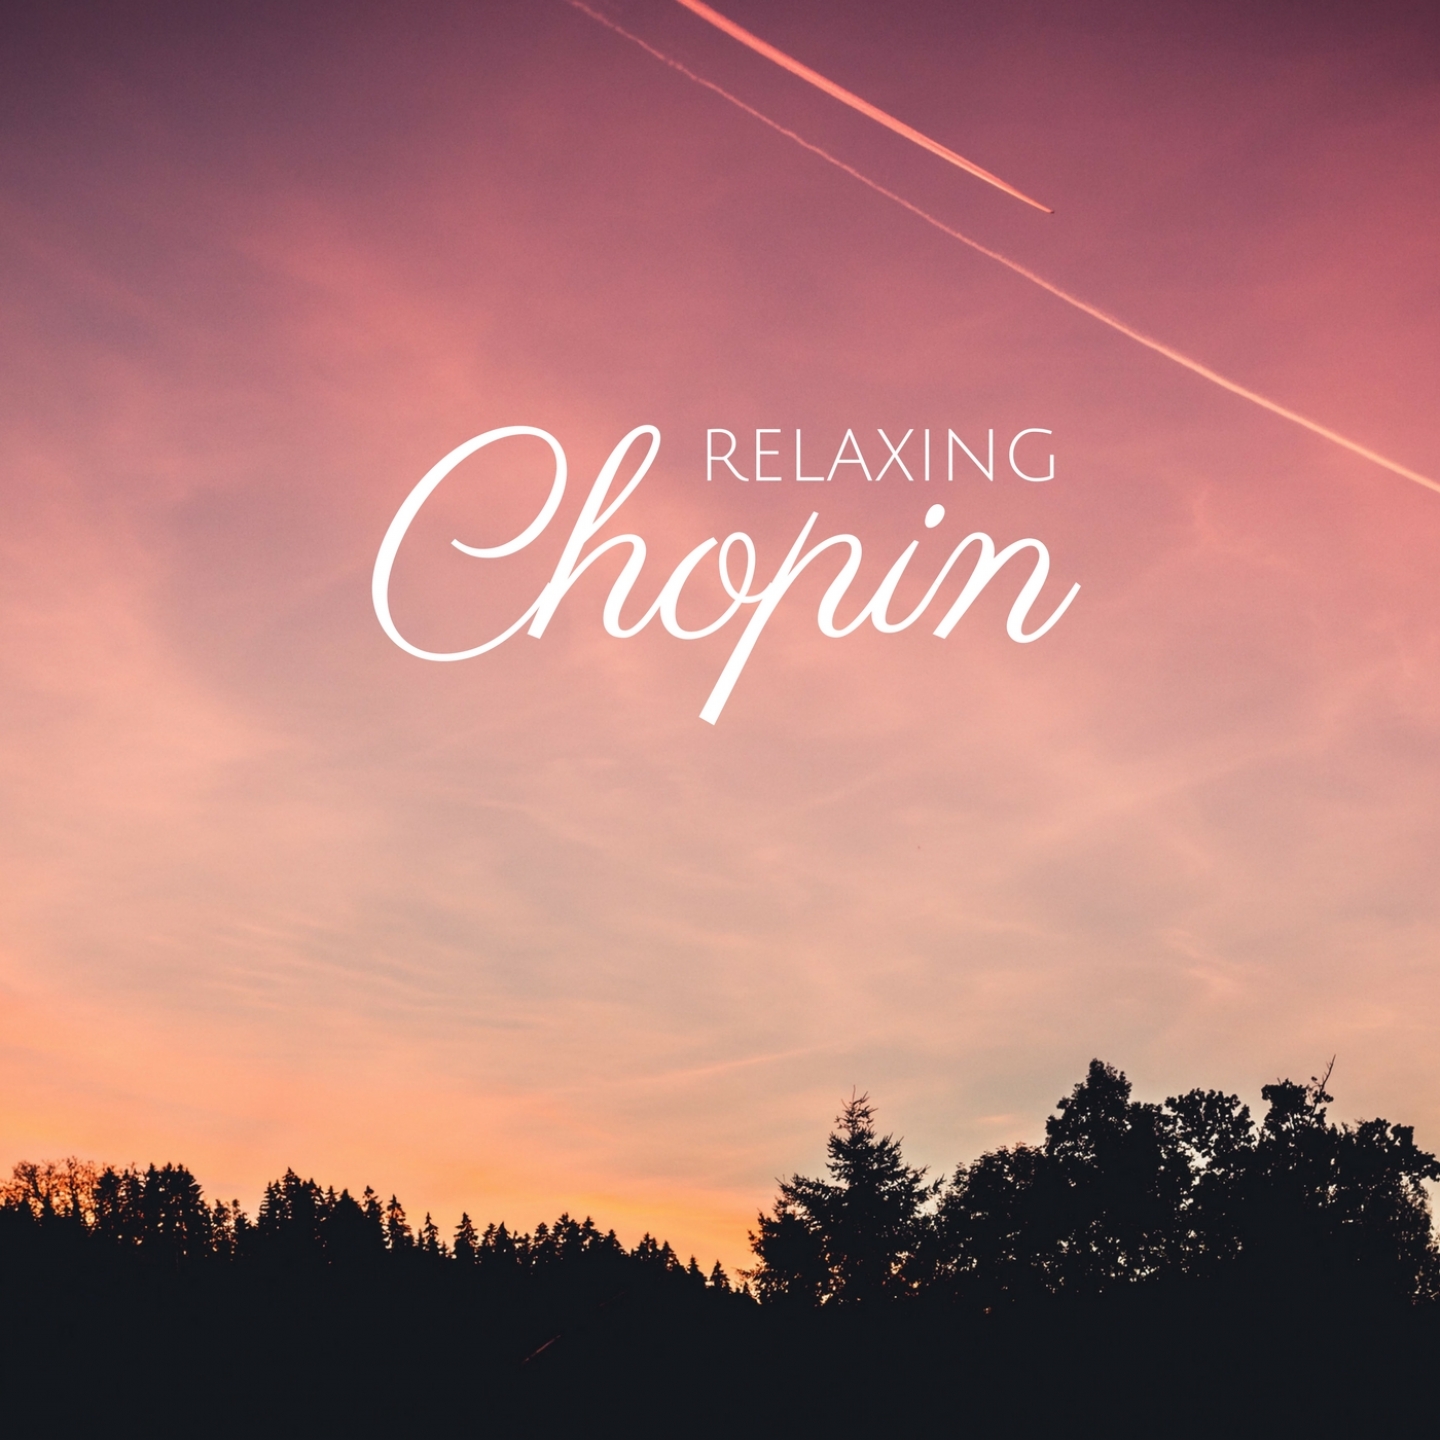 Chopin - Classical Music for Relaxation